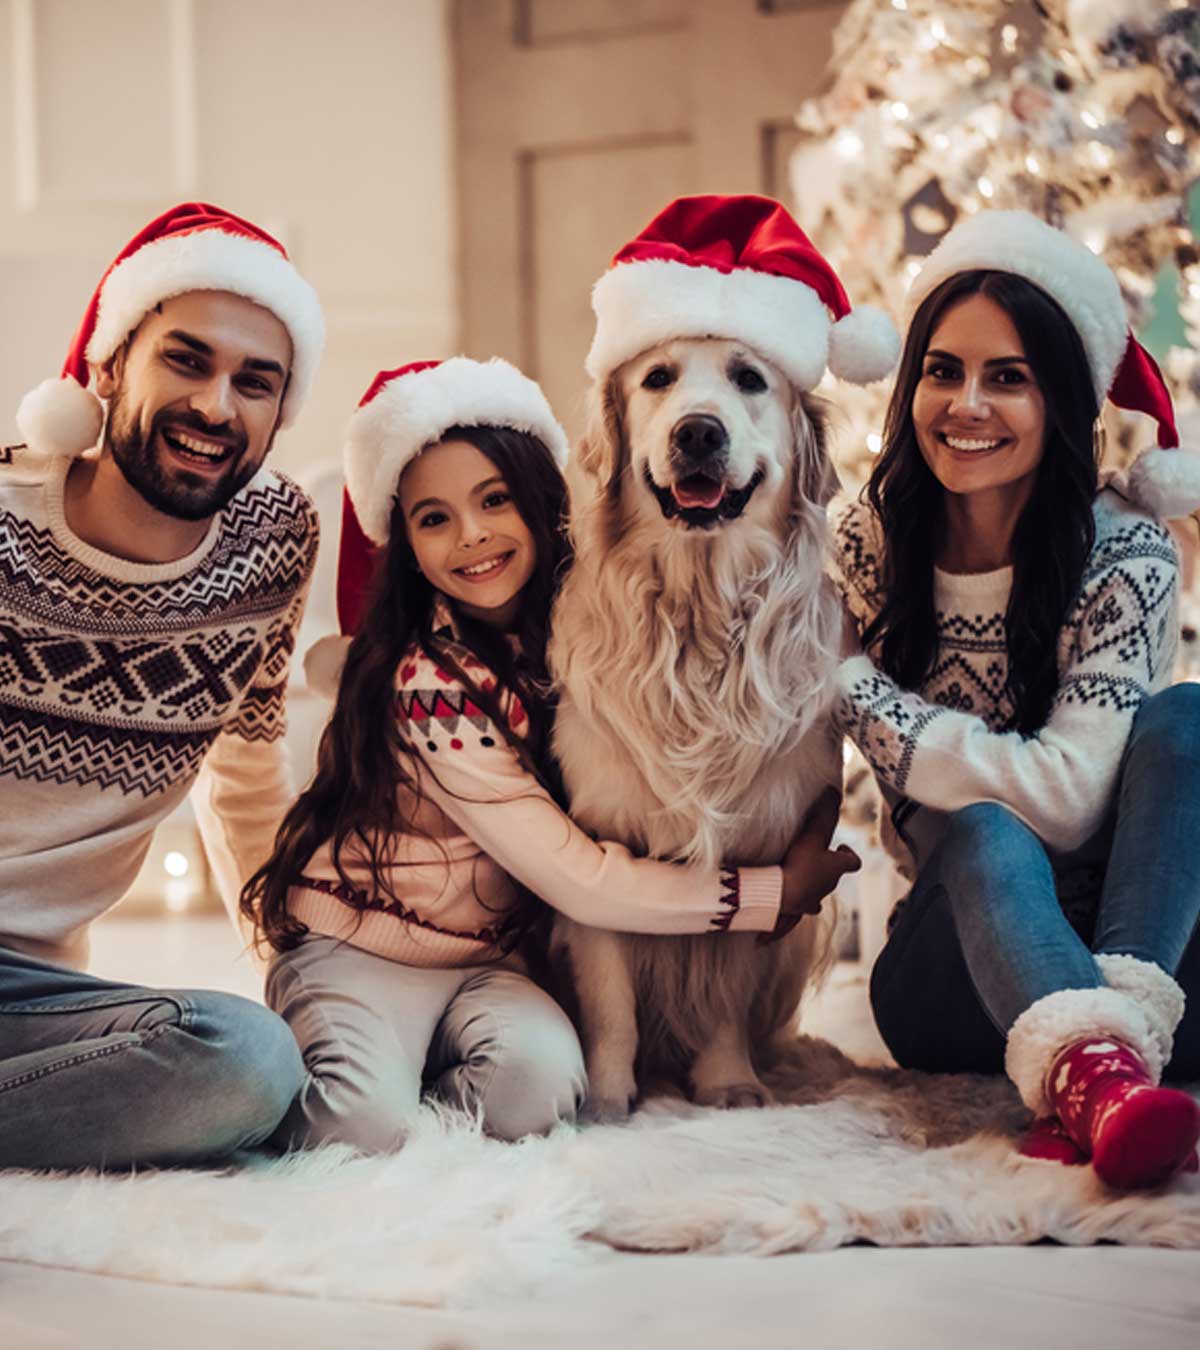 The 9 Best Ways To Spread Holiday Cheer For Kids And Families 